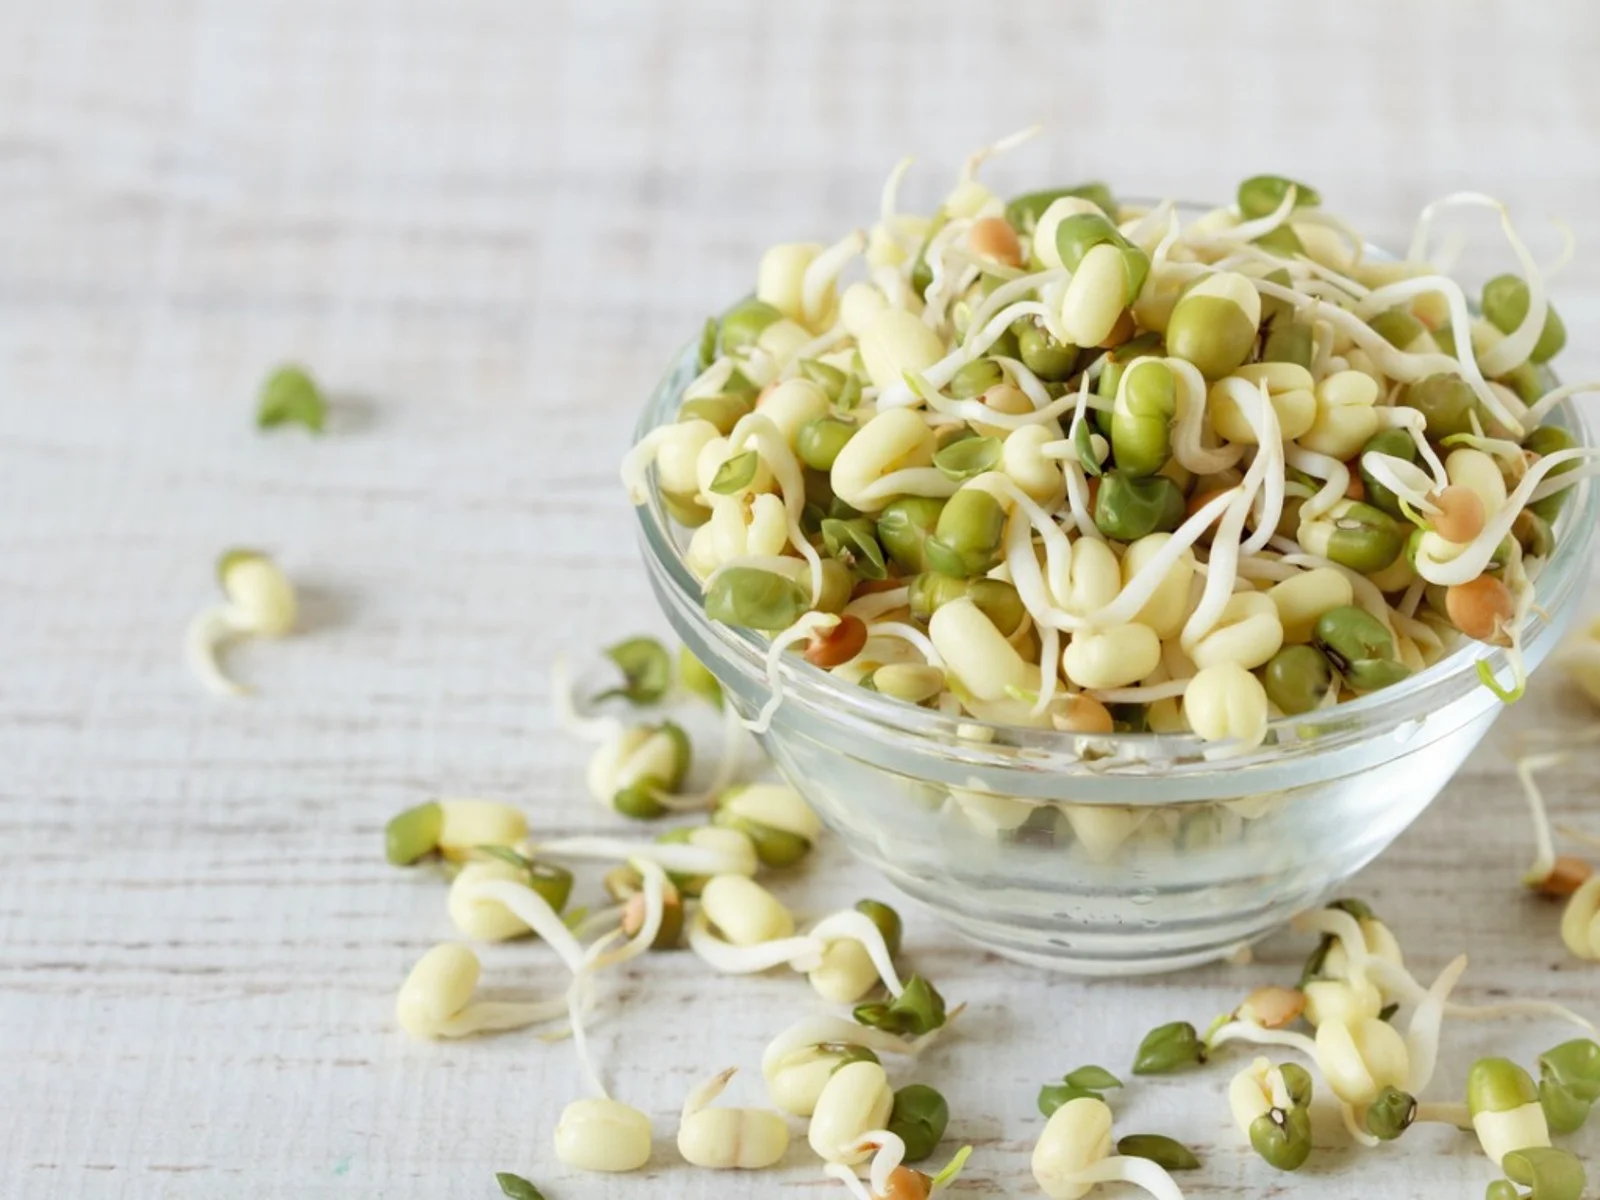 Where To Buy Sprout Seeds